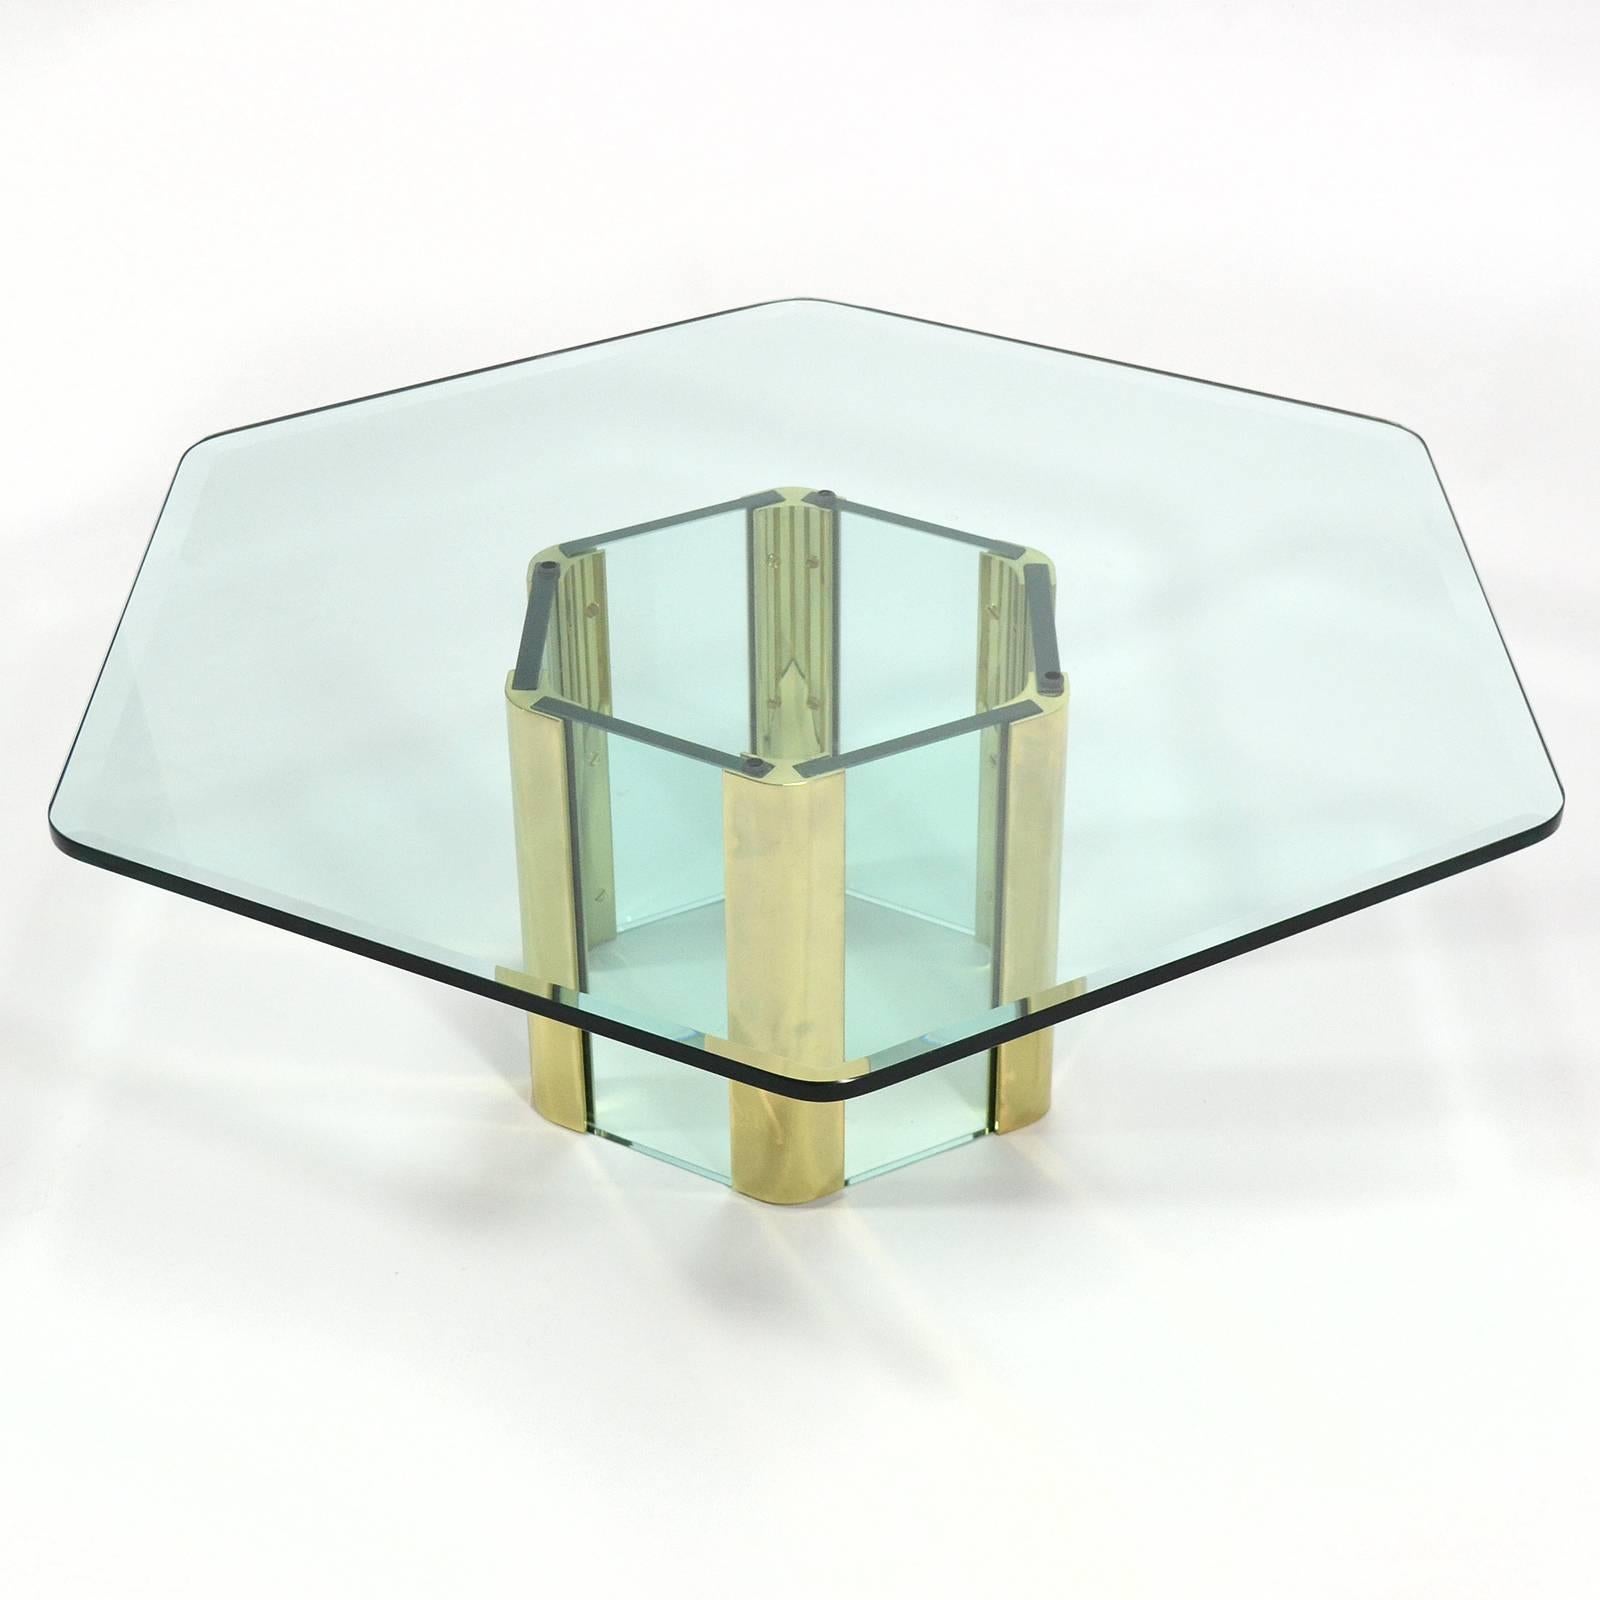 American Pace Coffee Table with Hexagonal Designed by Leon Rosen